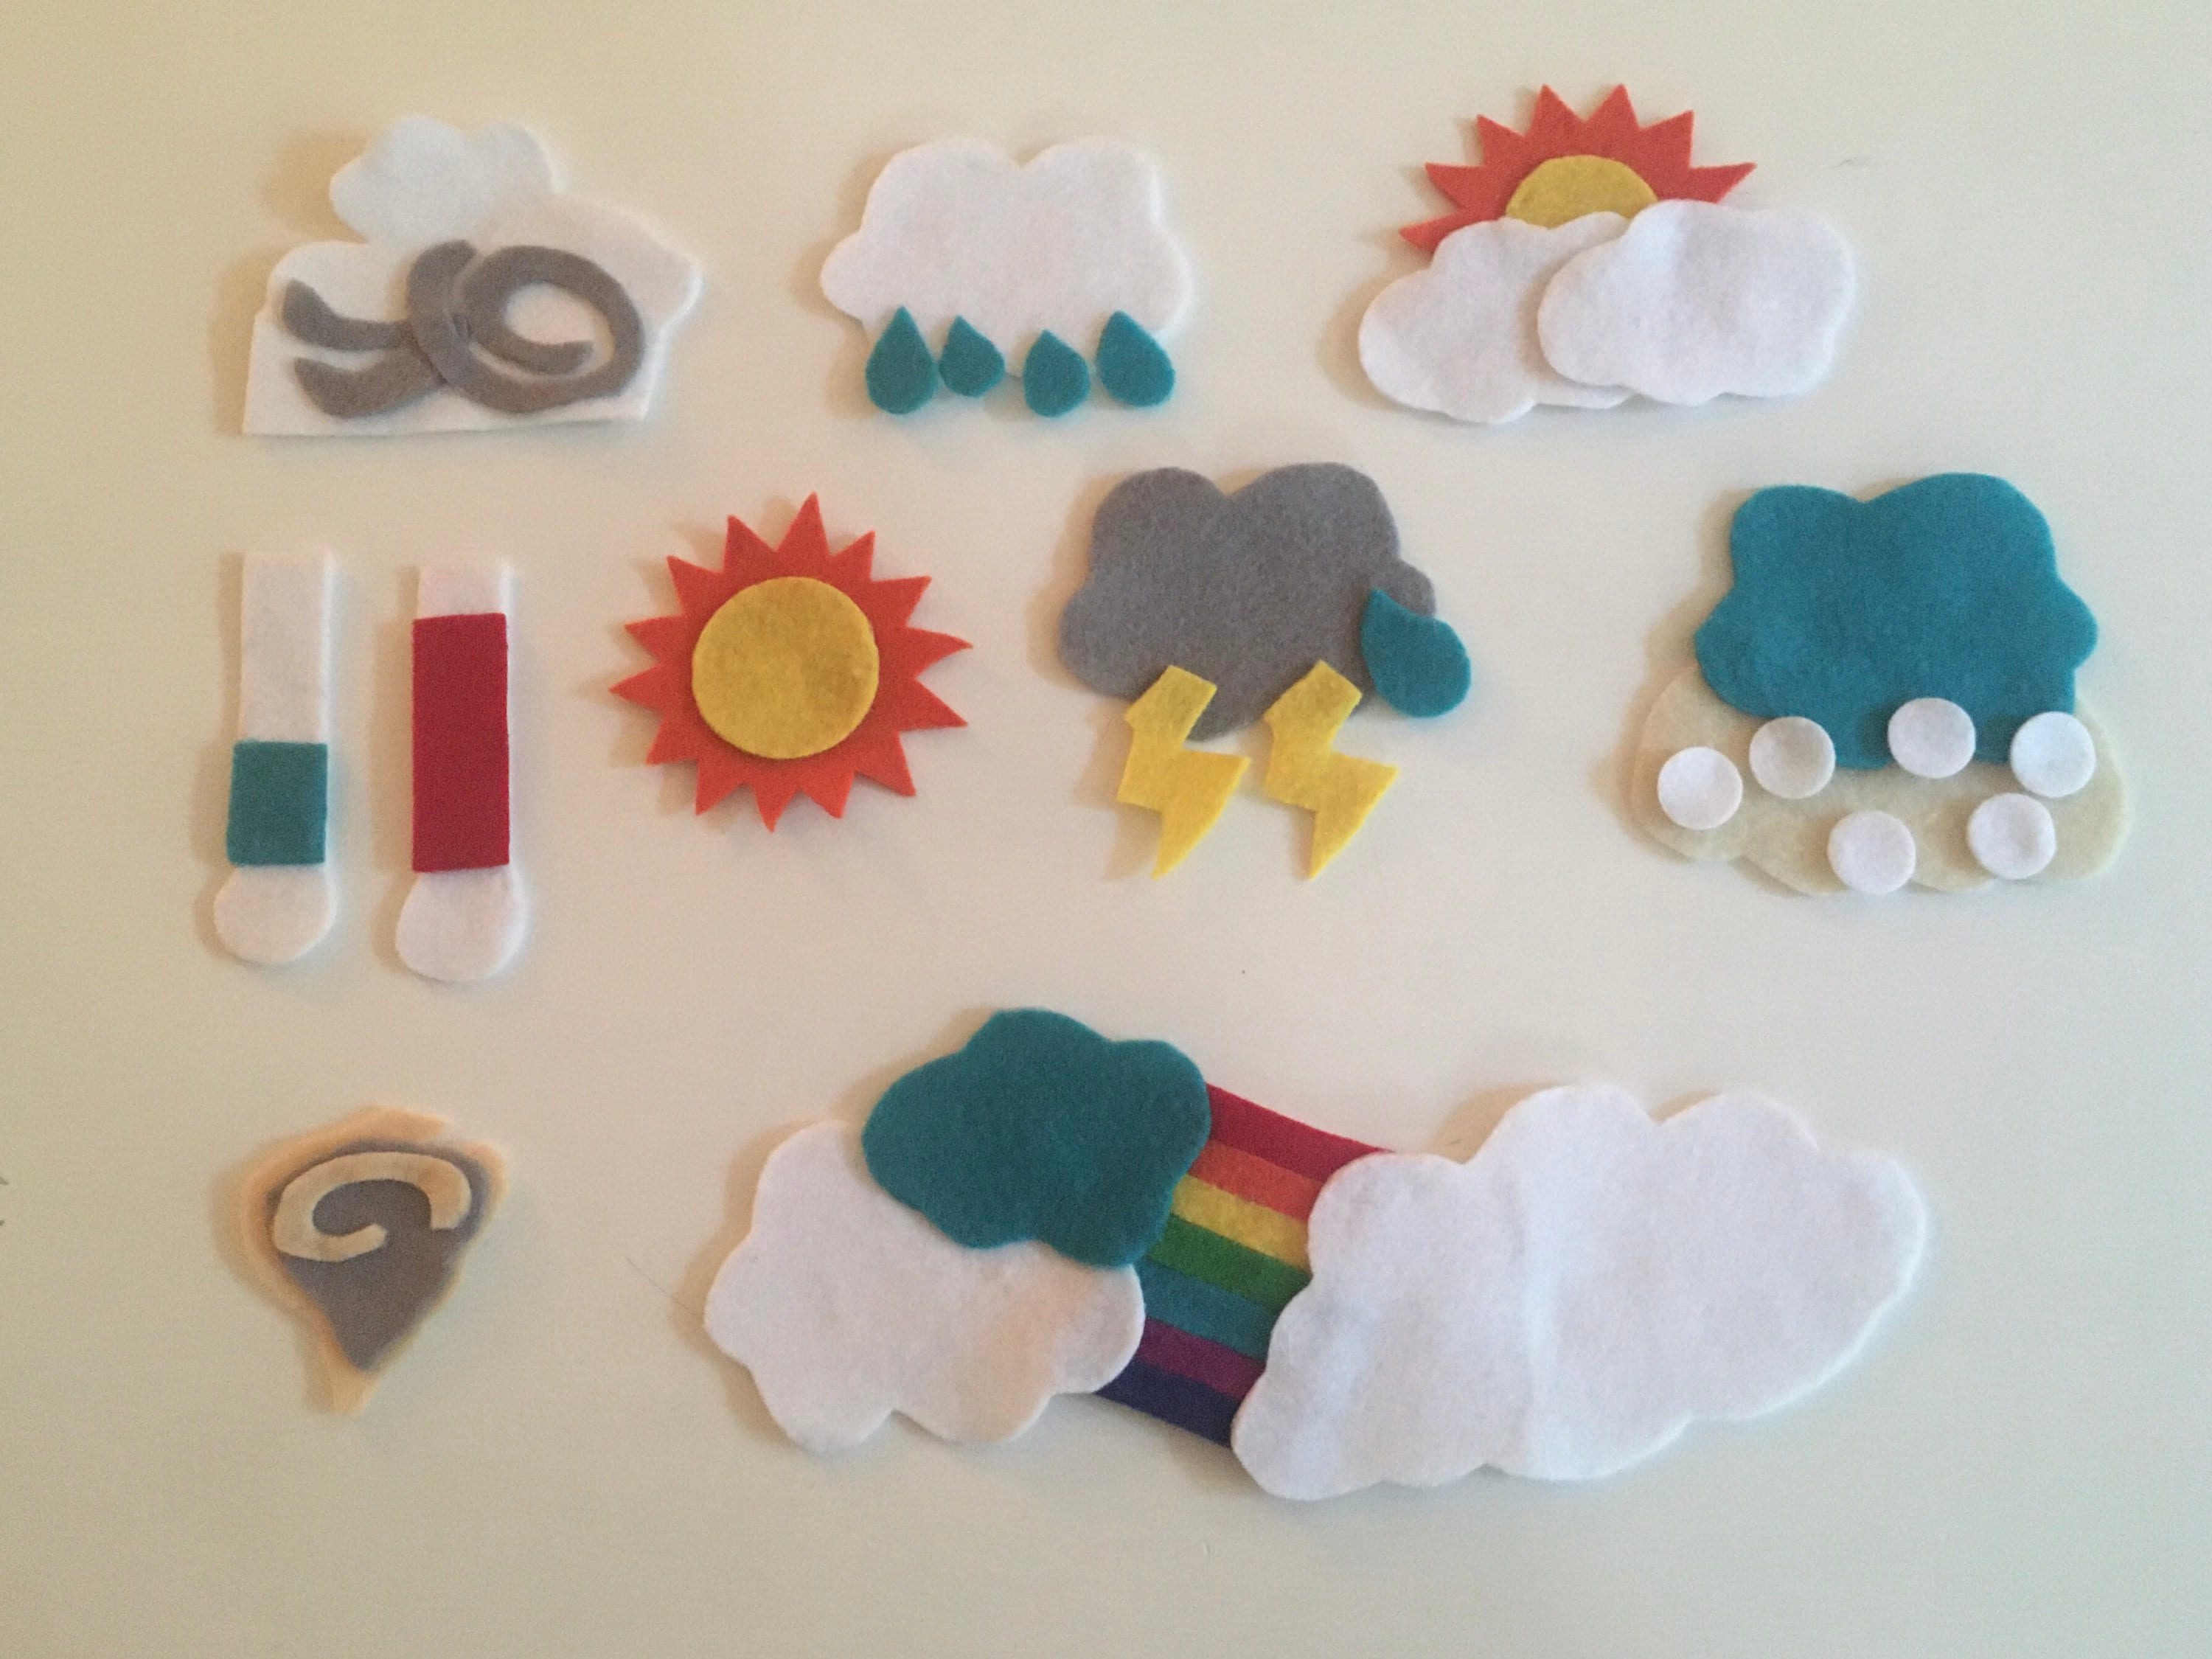 Make Your Own Felt Board (Tutorial) - Buggy and Buddy